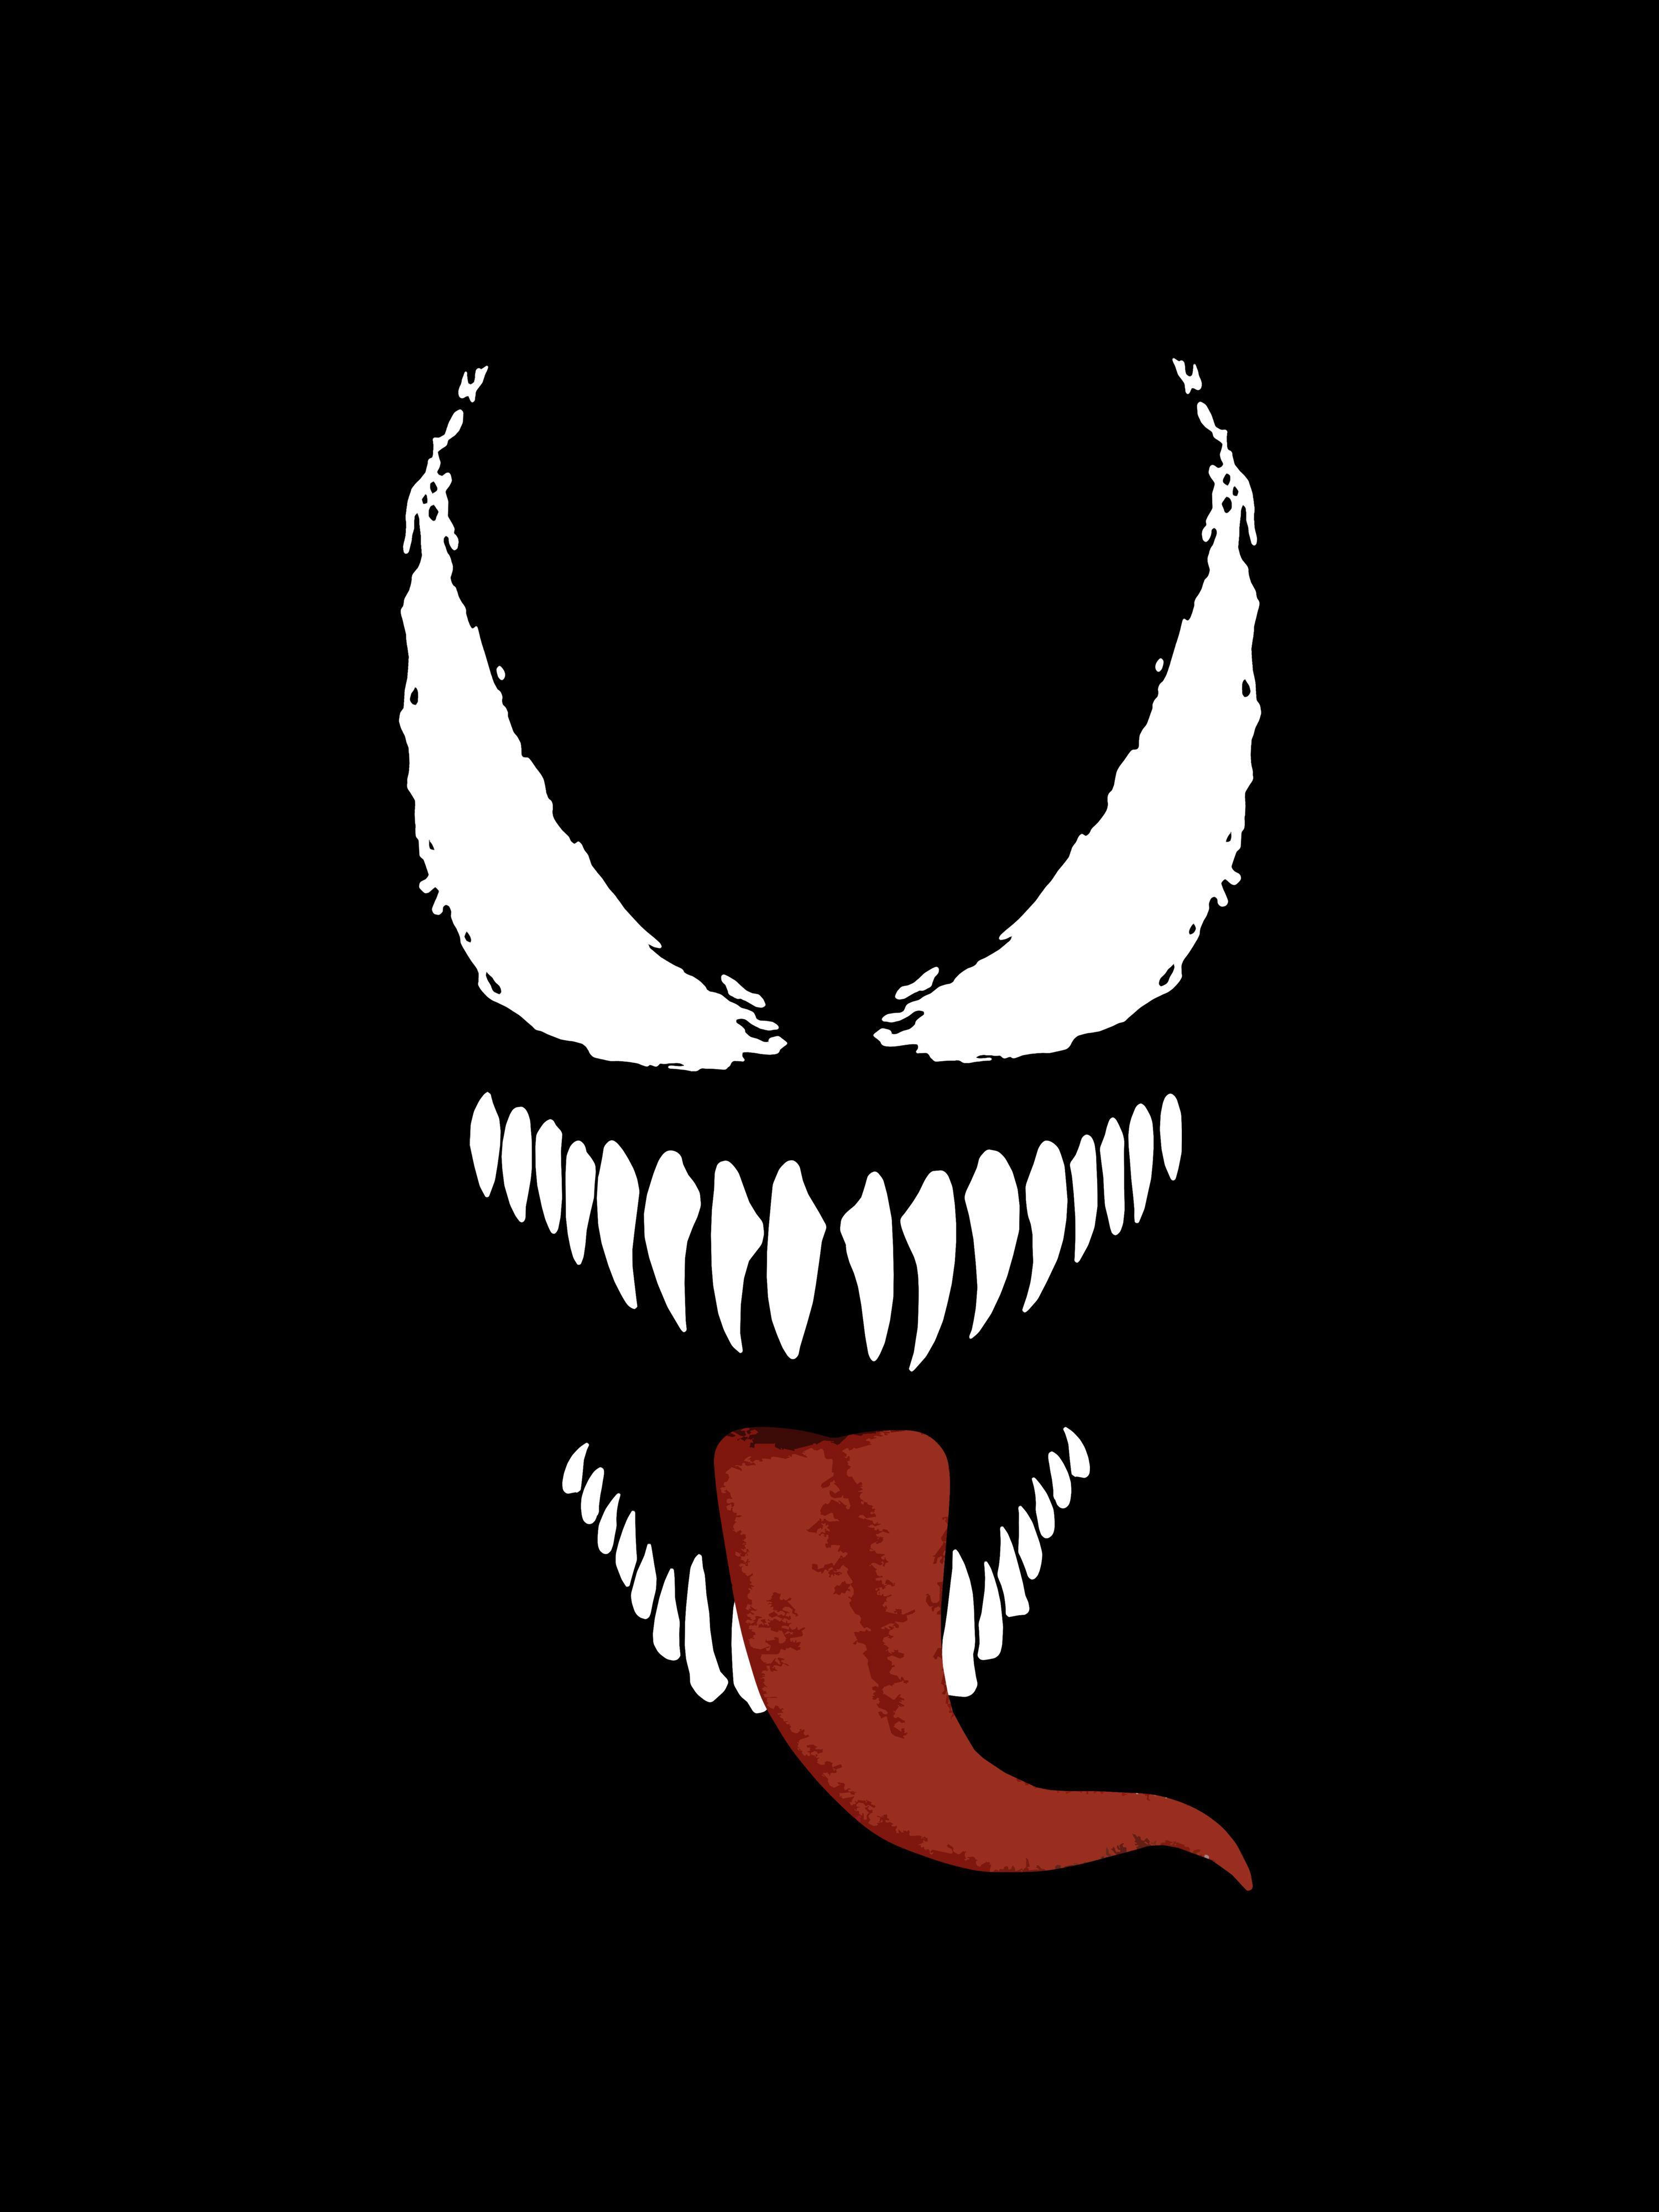 Venom Logo - Had to create this after seeing the new Venom trailer : thevenomsite